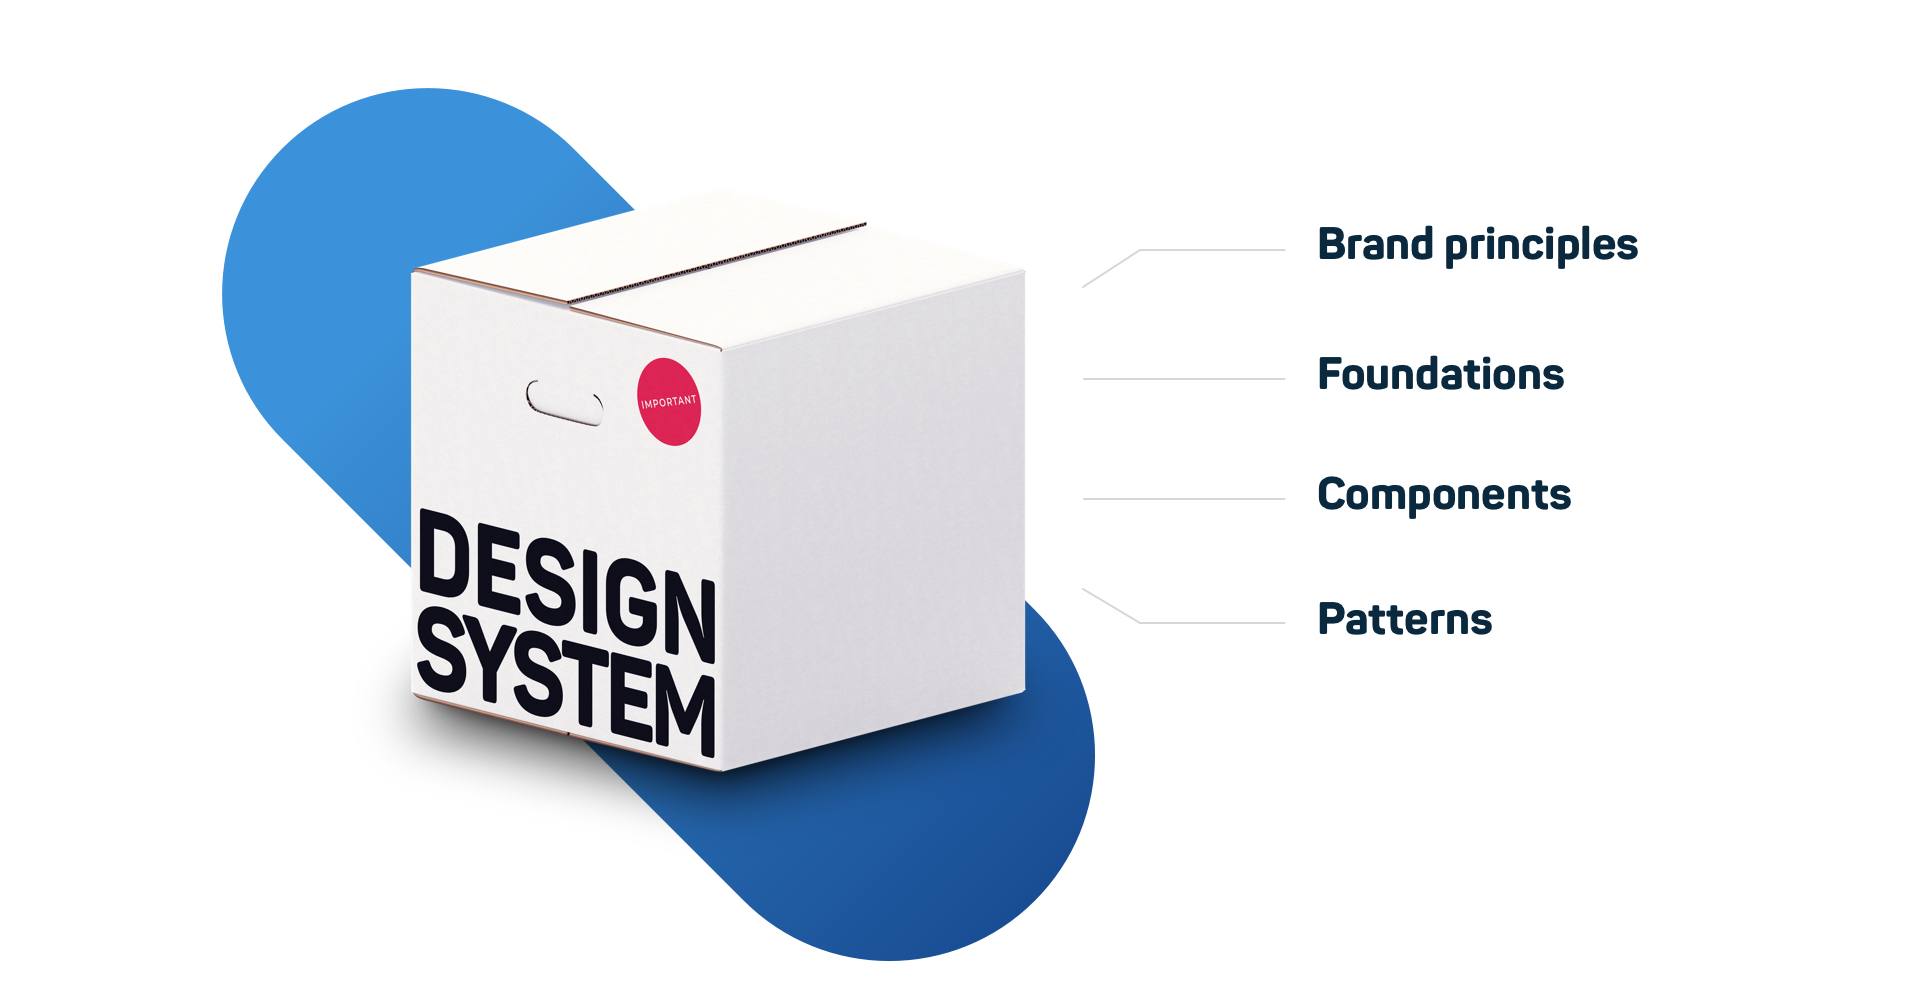 Four core parts of an effective design system